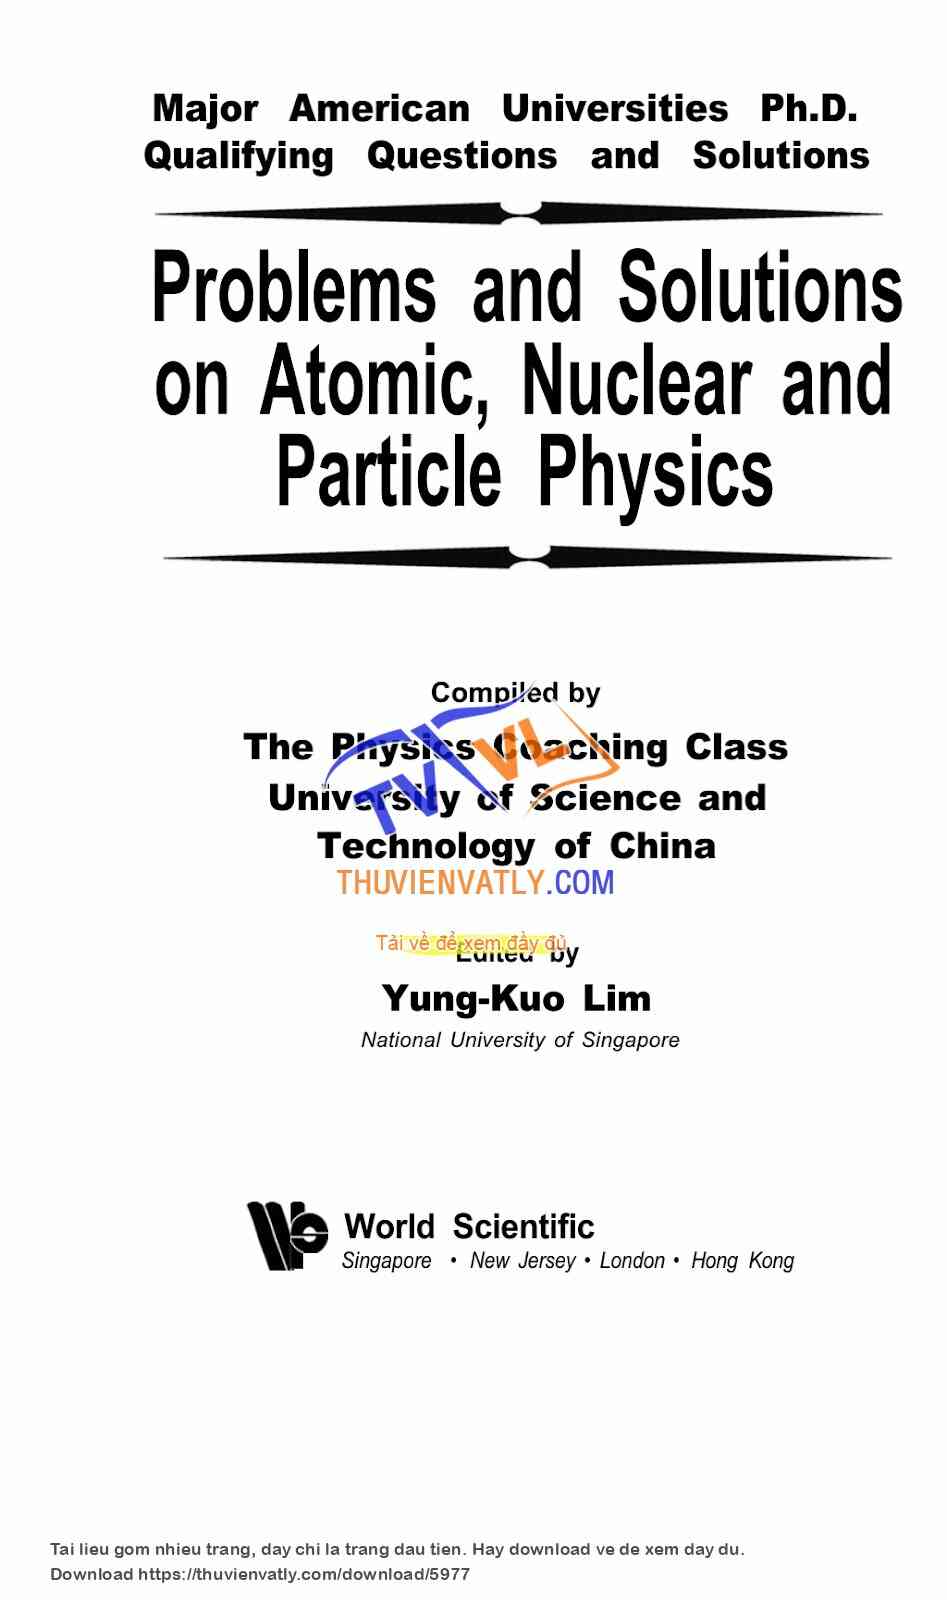 Problems and Solutions on Atomic, Nuclear and Particle Physics - Yung-Kuo Lim